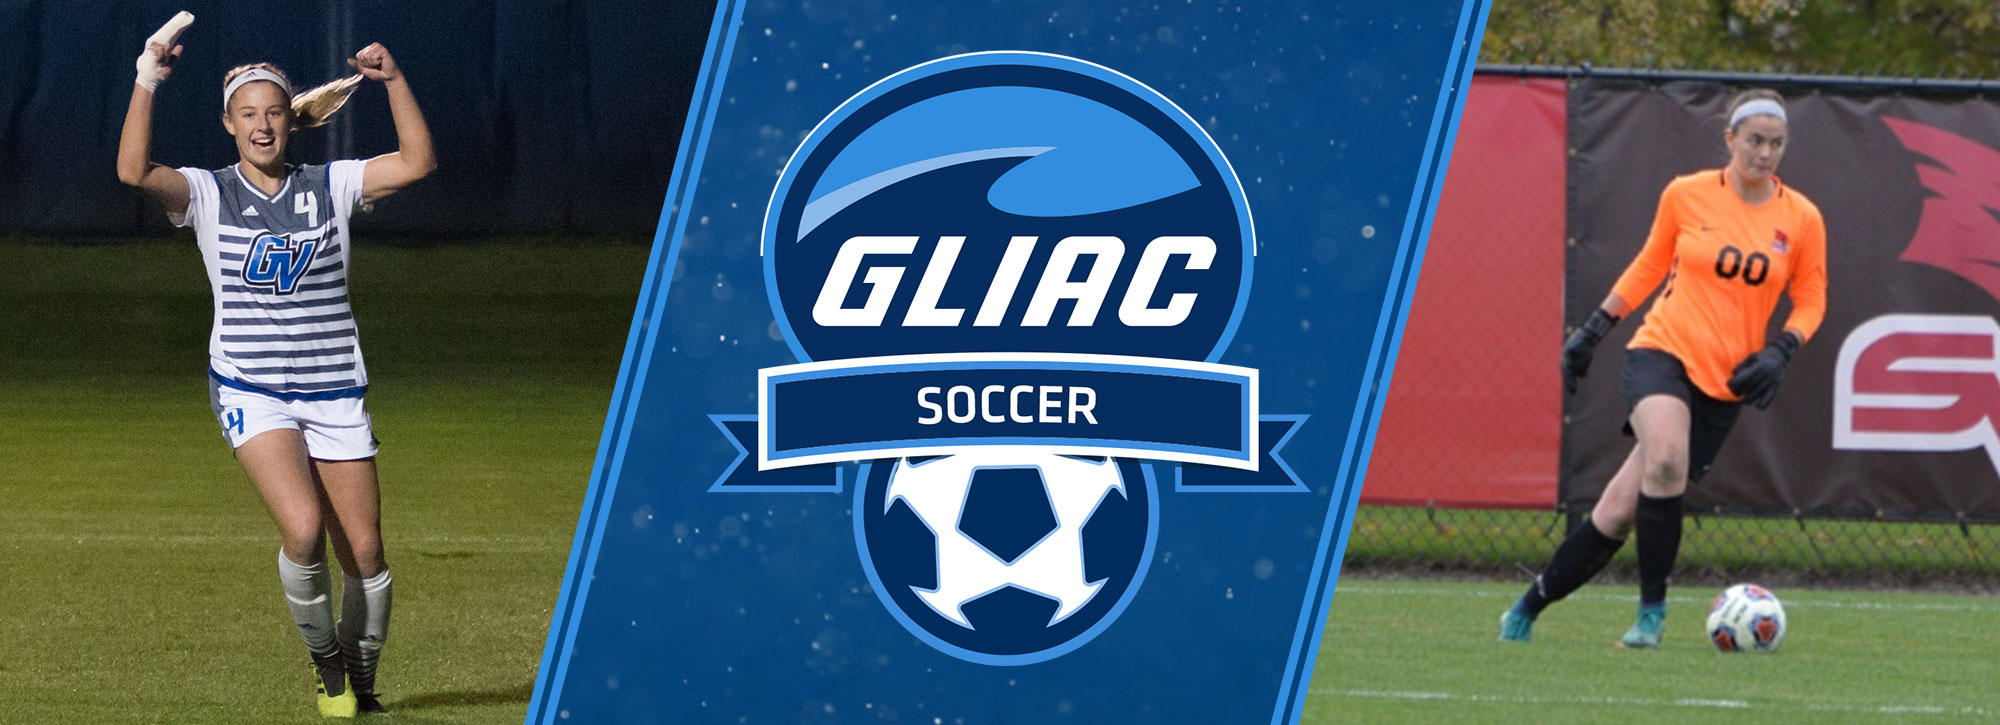 Grand Valley State's Cook, Saginaw Valley's Watts Collect GLIAC Women's Soccer Weekly Awards